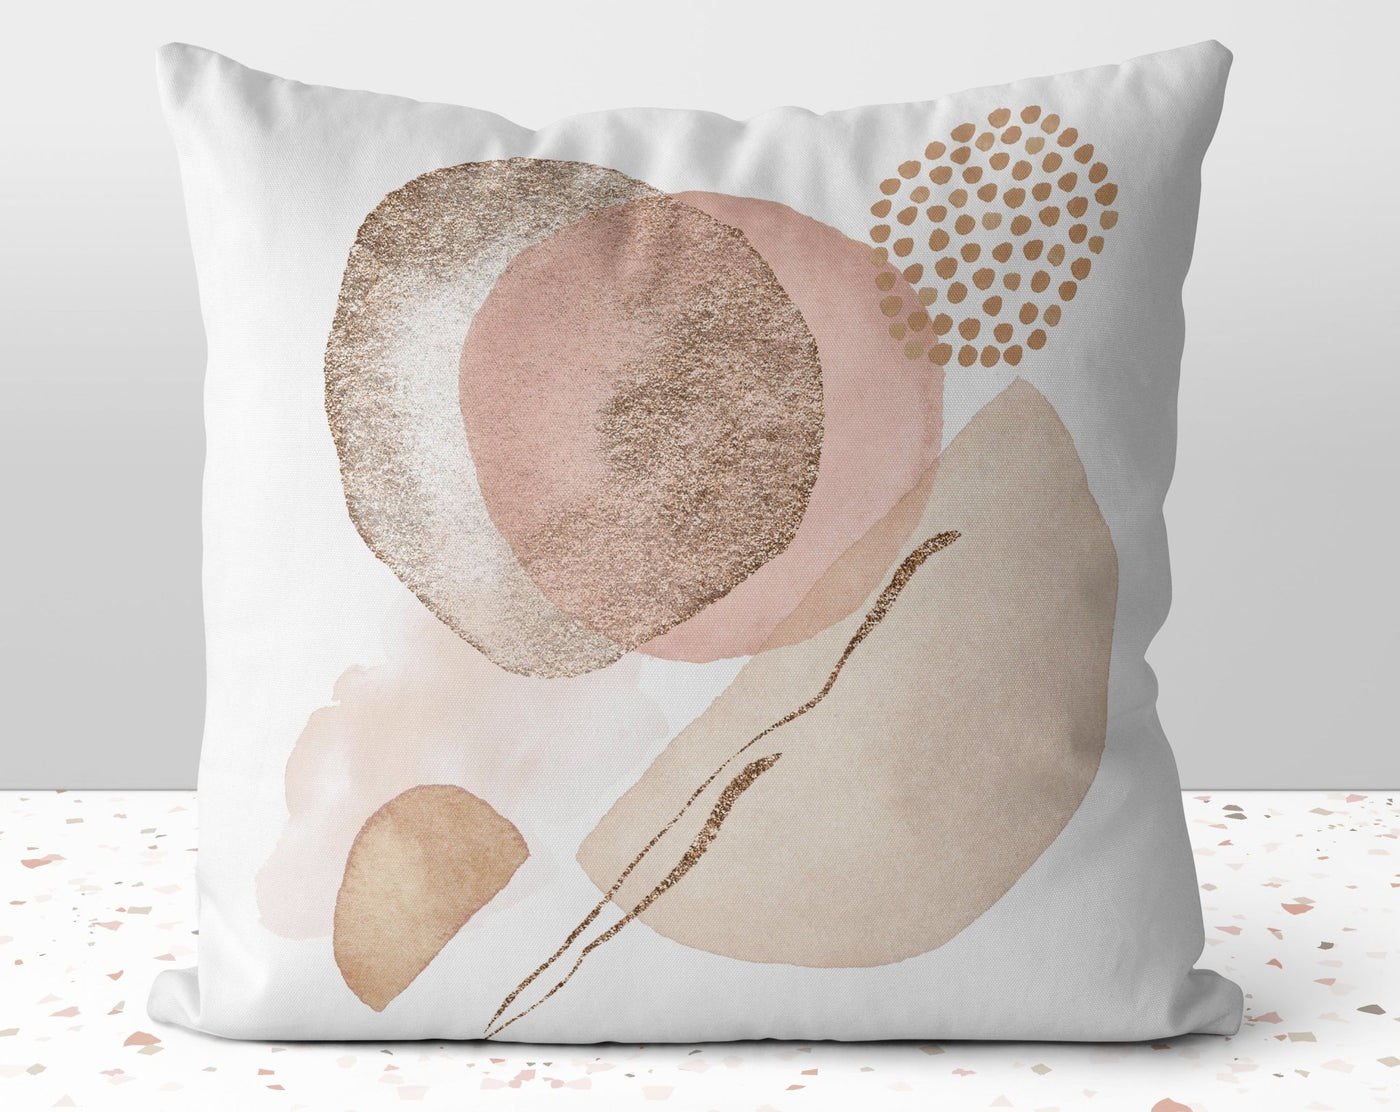 Abstract Glam Pink Beige Square Pillow with Dotted Accents with Cover Throw with Insert - Cush Potato Pillows